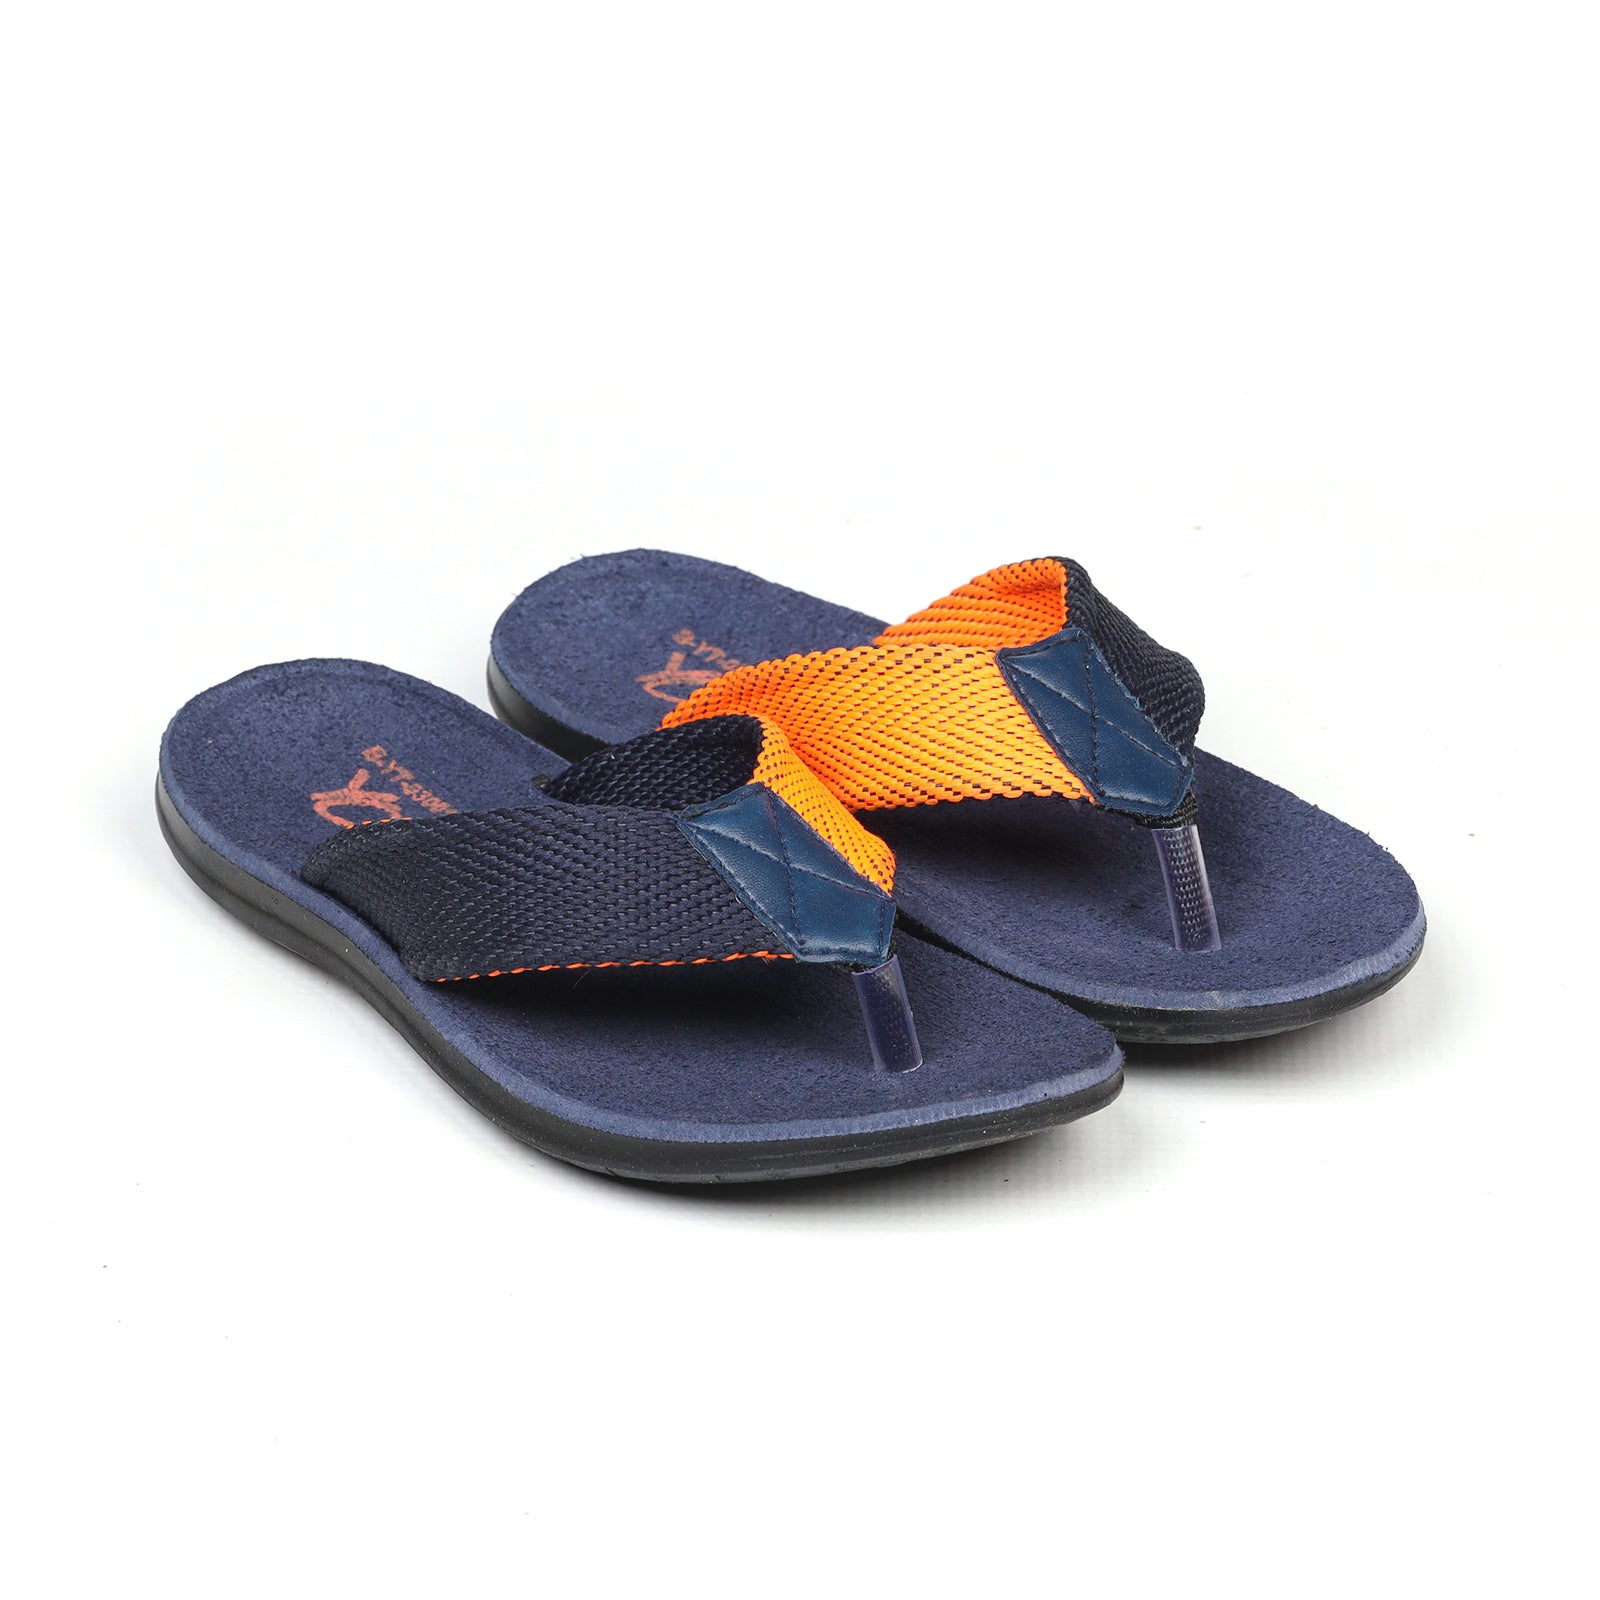 Buy Right Steps Blue Waterproof Casual Sandals for Mens/Boys, Slippers & Flip  Flops (BLUE, numeric_6) at Amazon.in